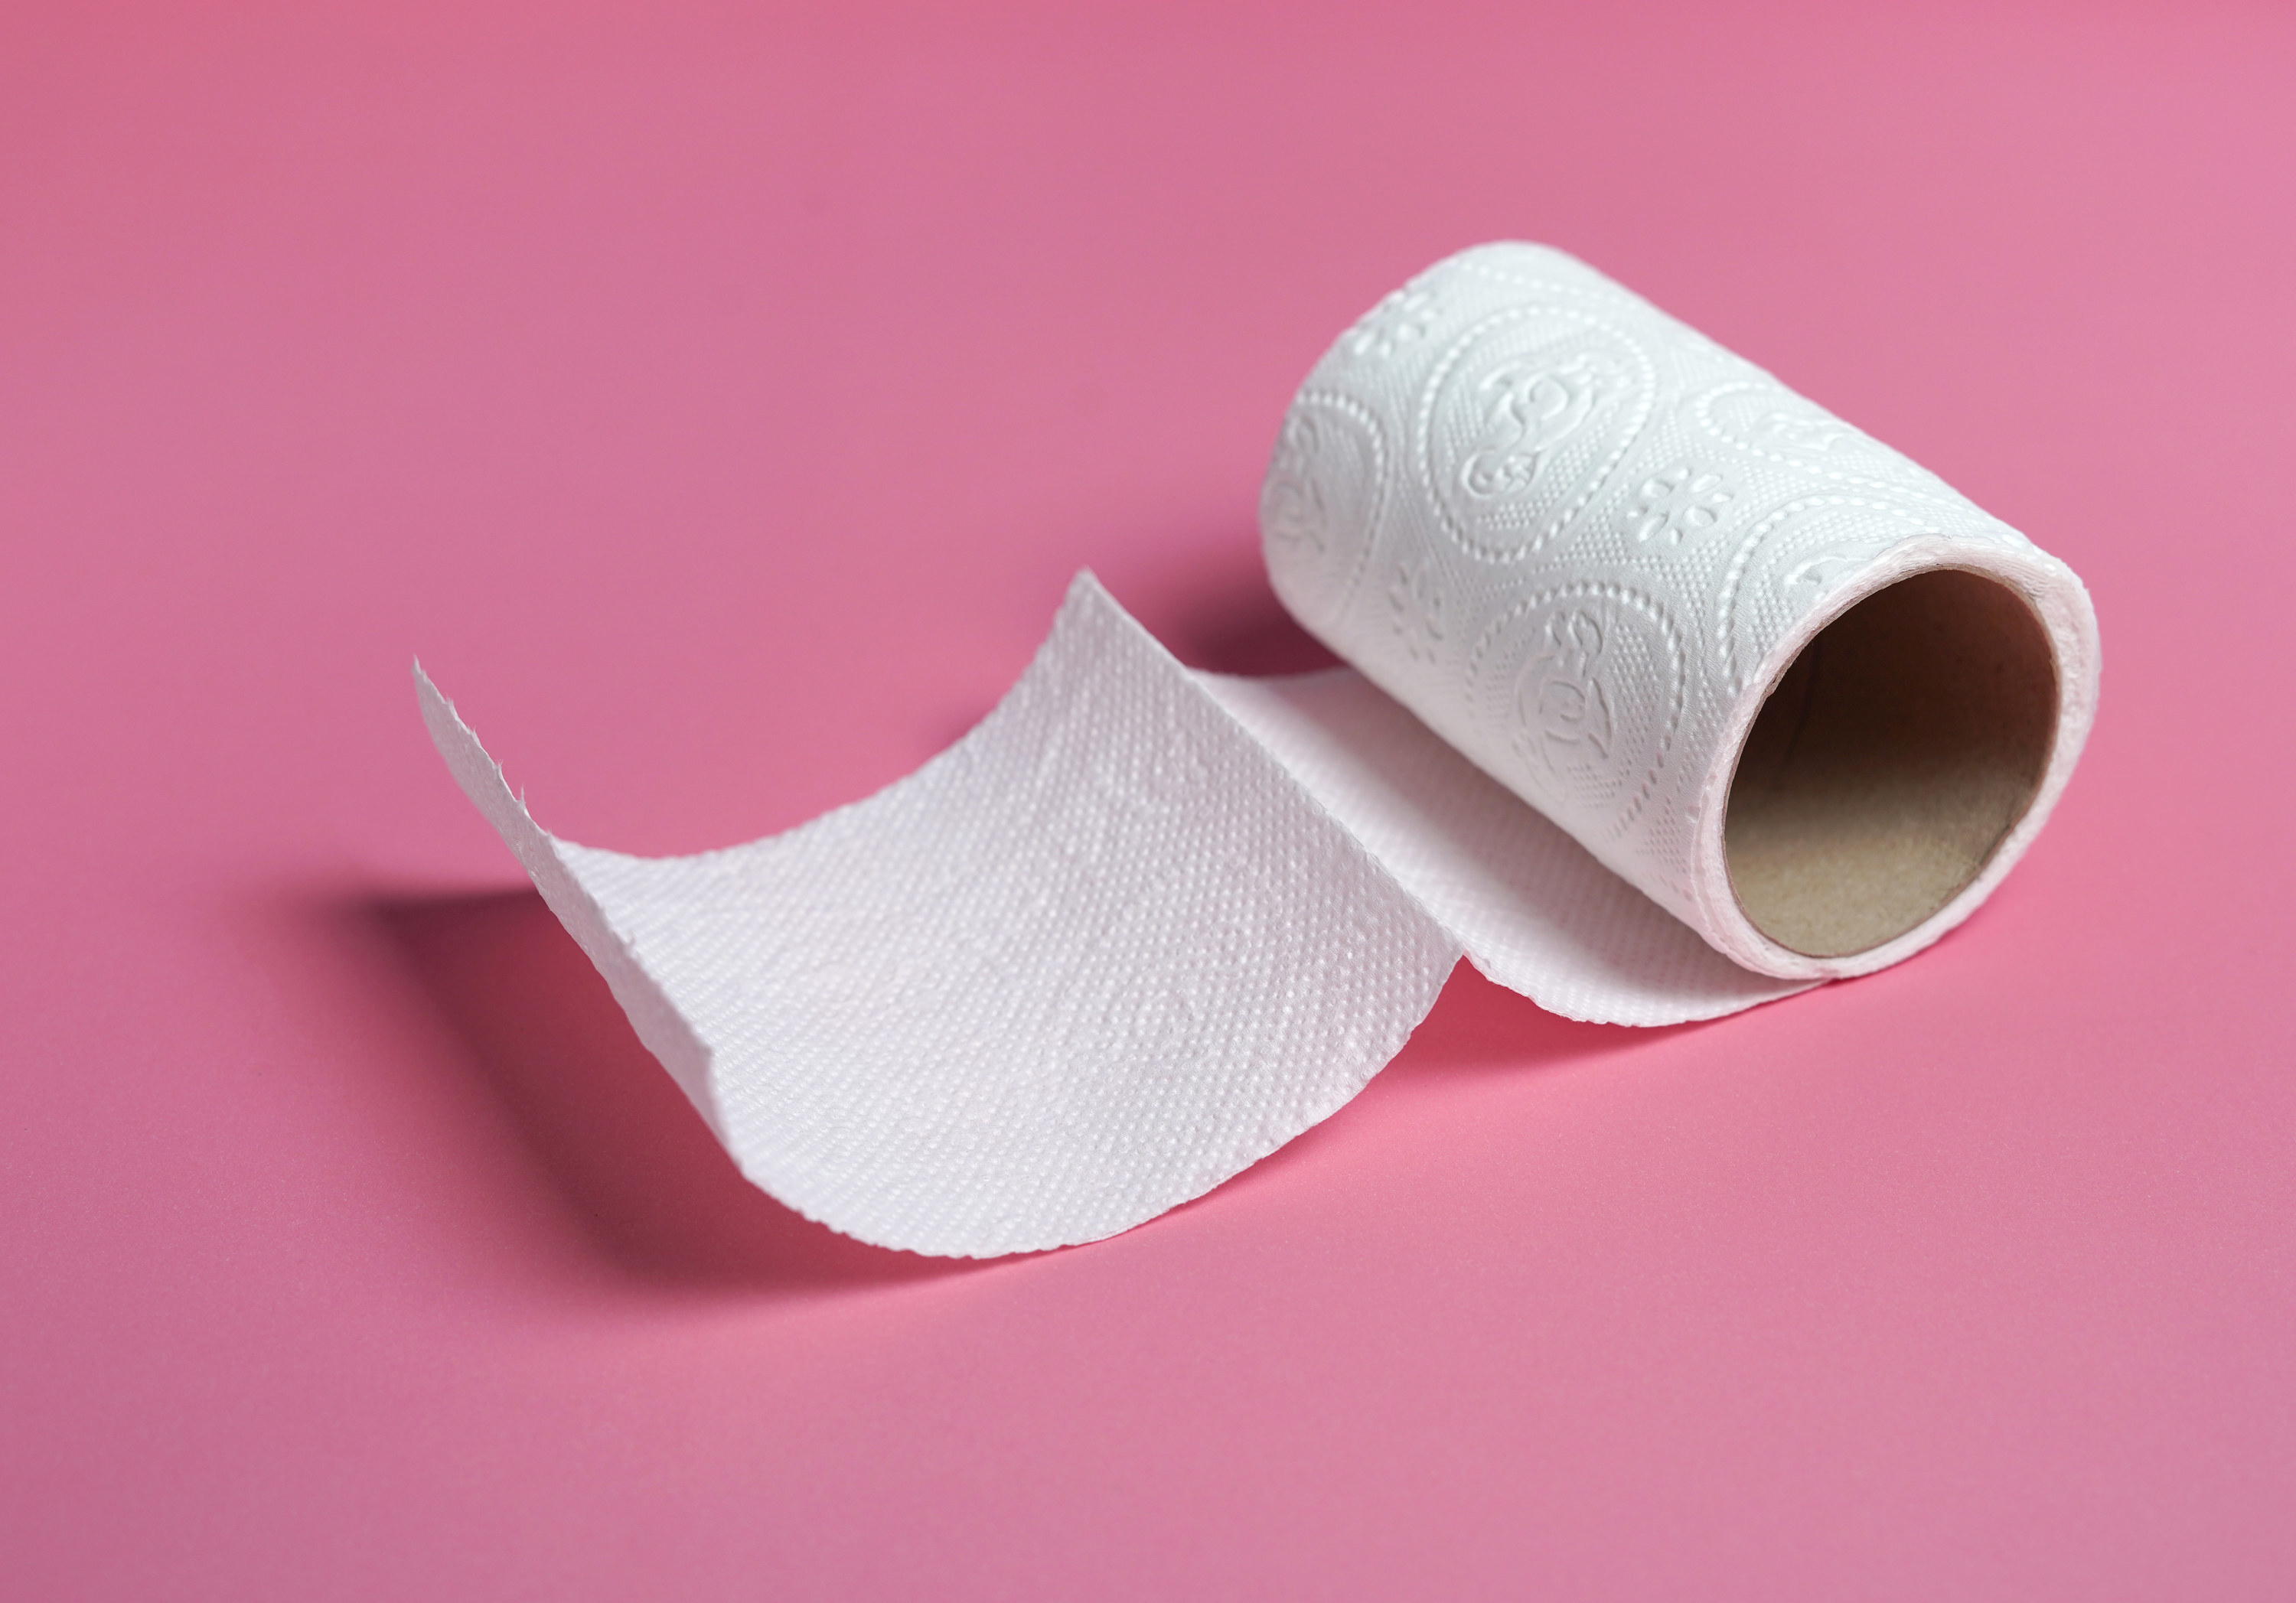 Toilet paper roll near the end of its life on a colored background